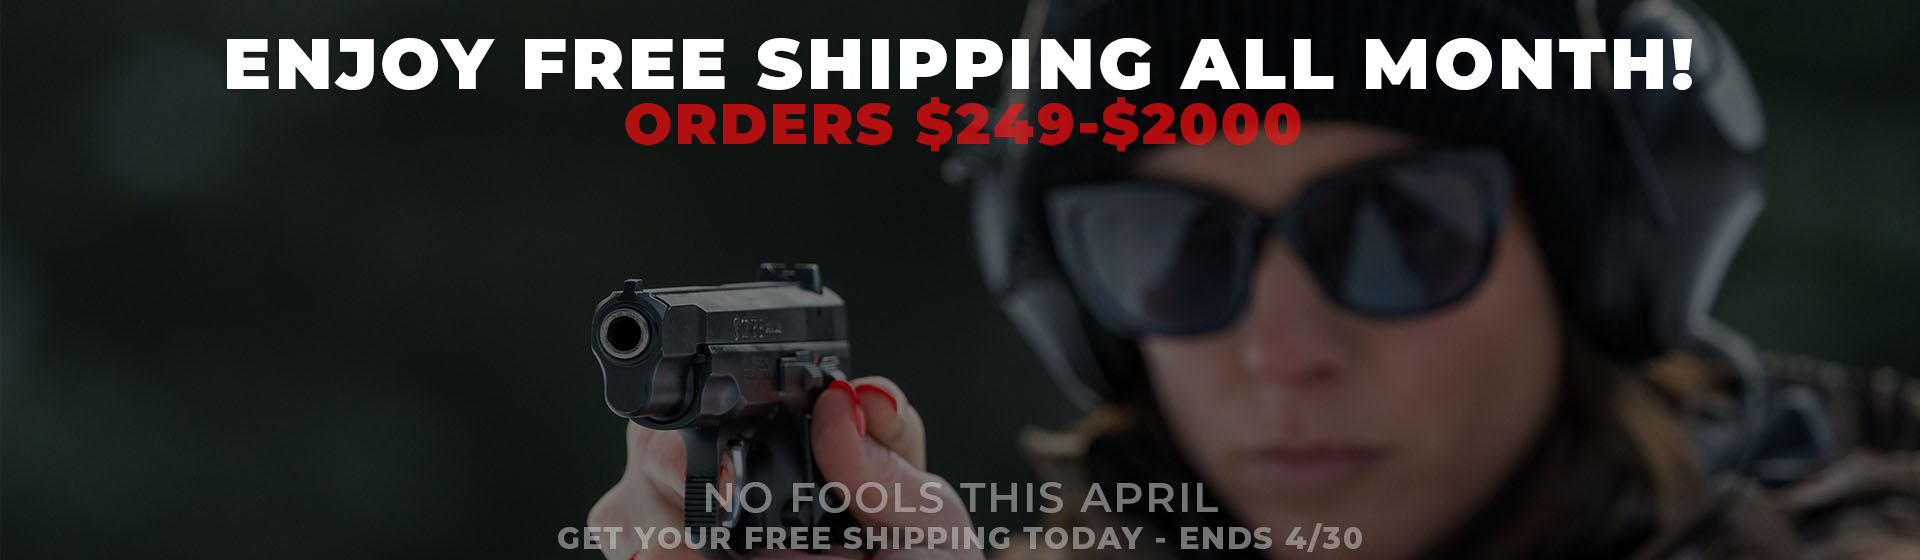 It's no joke! FREE Shipping for all of April! Orders $249-$2000